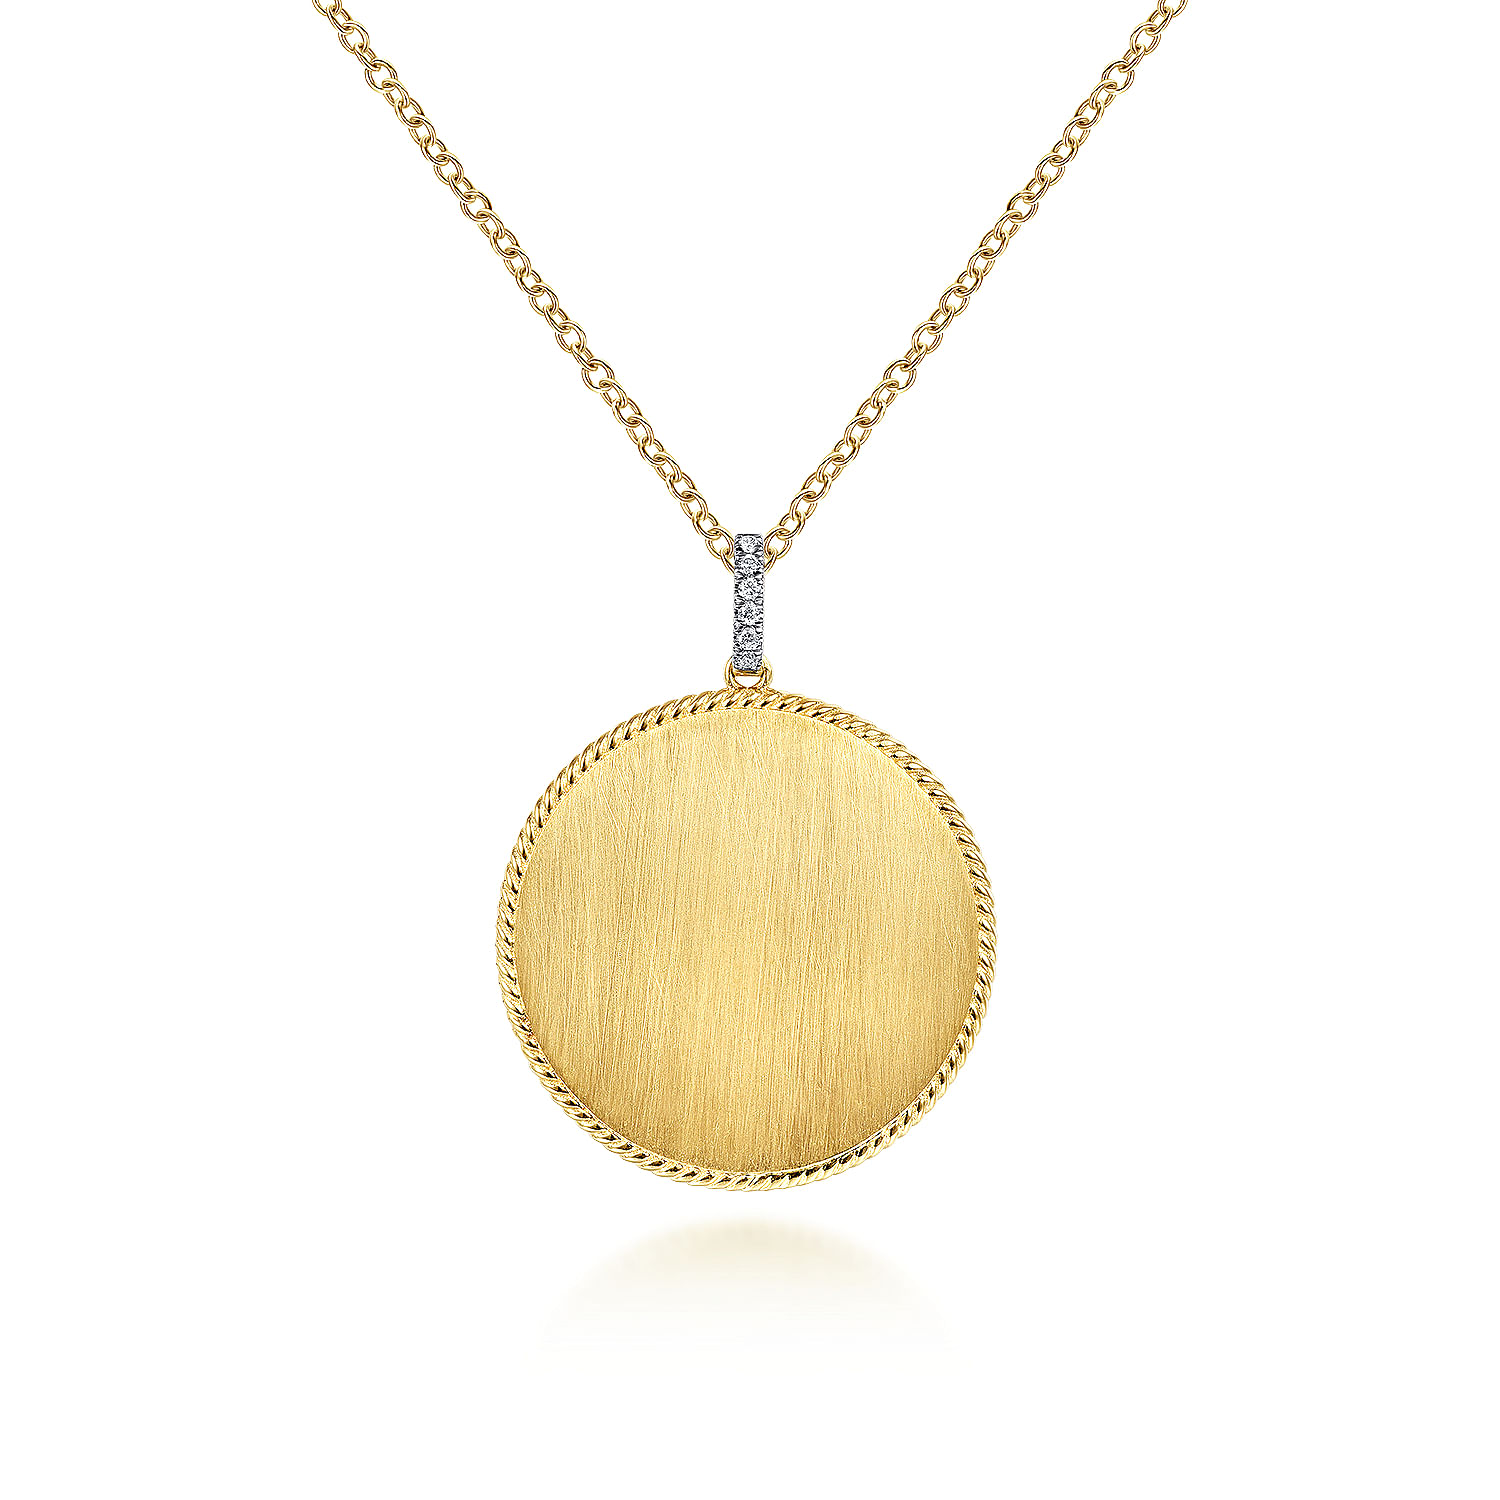 Gabriel - 32 inch 14K Yellow Gold Round Pendant Necklace with Diamond Bale